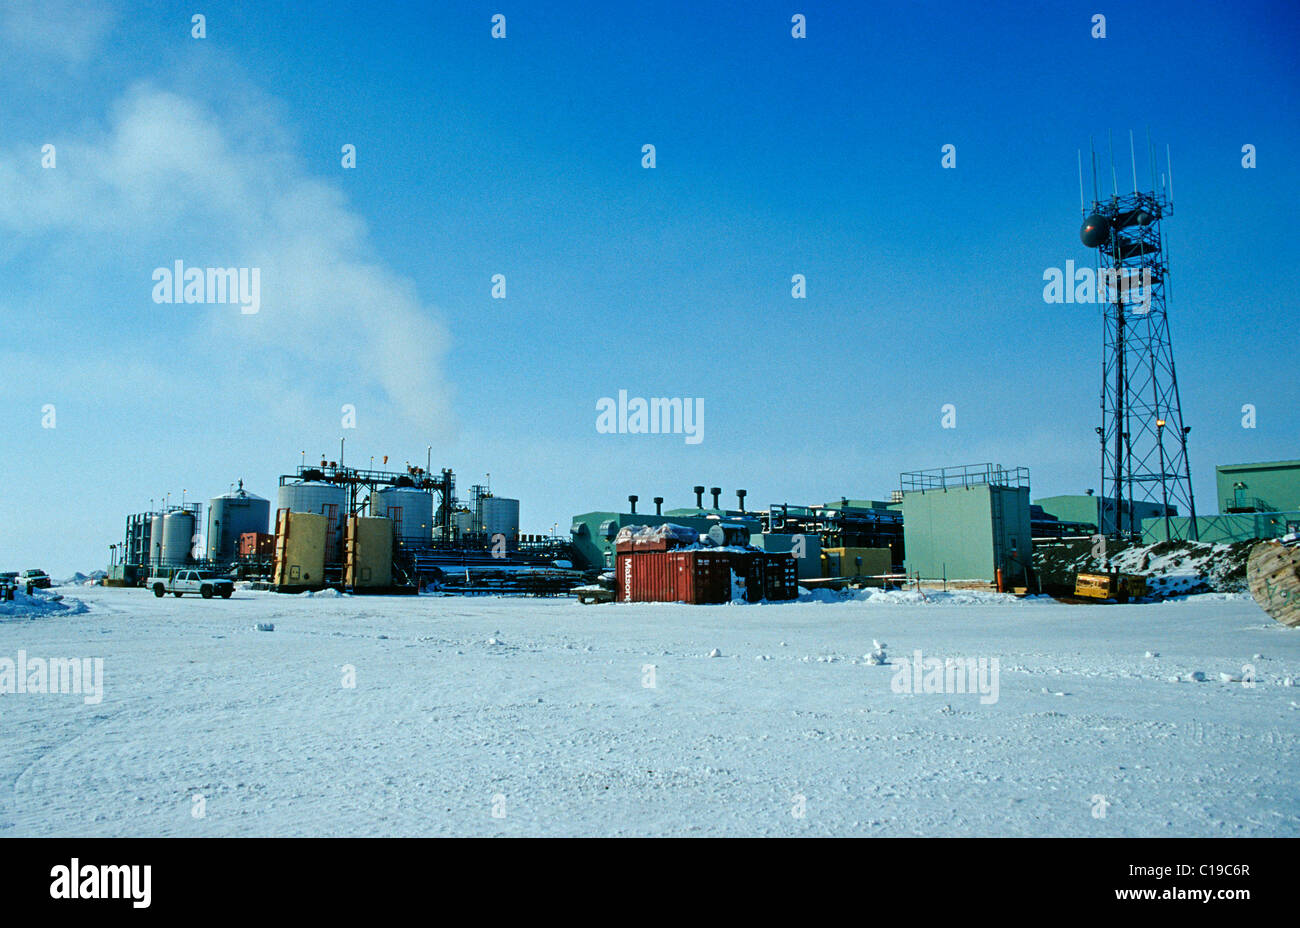 Oil extraction site in winter, Prudhoe Bay, Alaska, USA Stock Photo